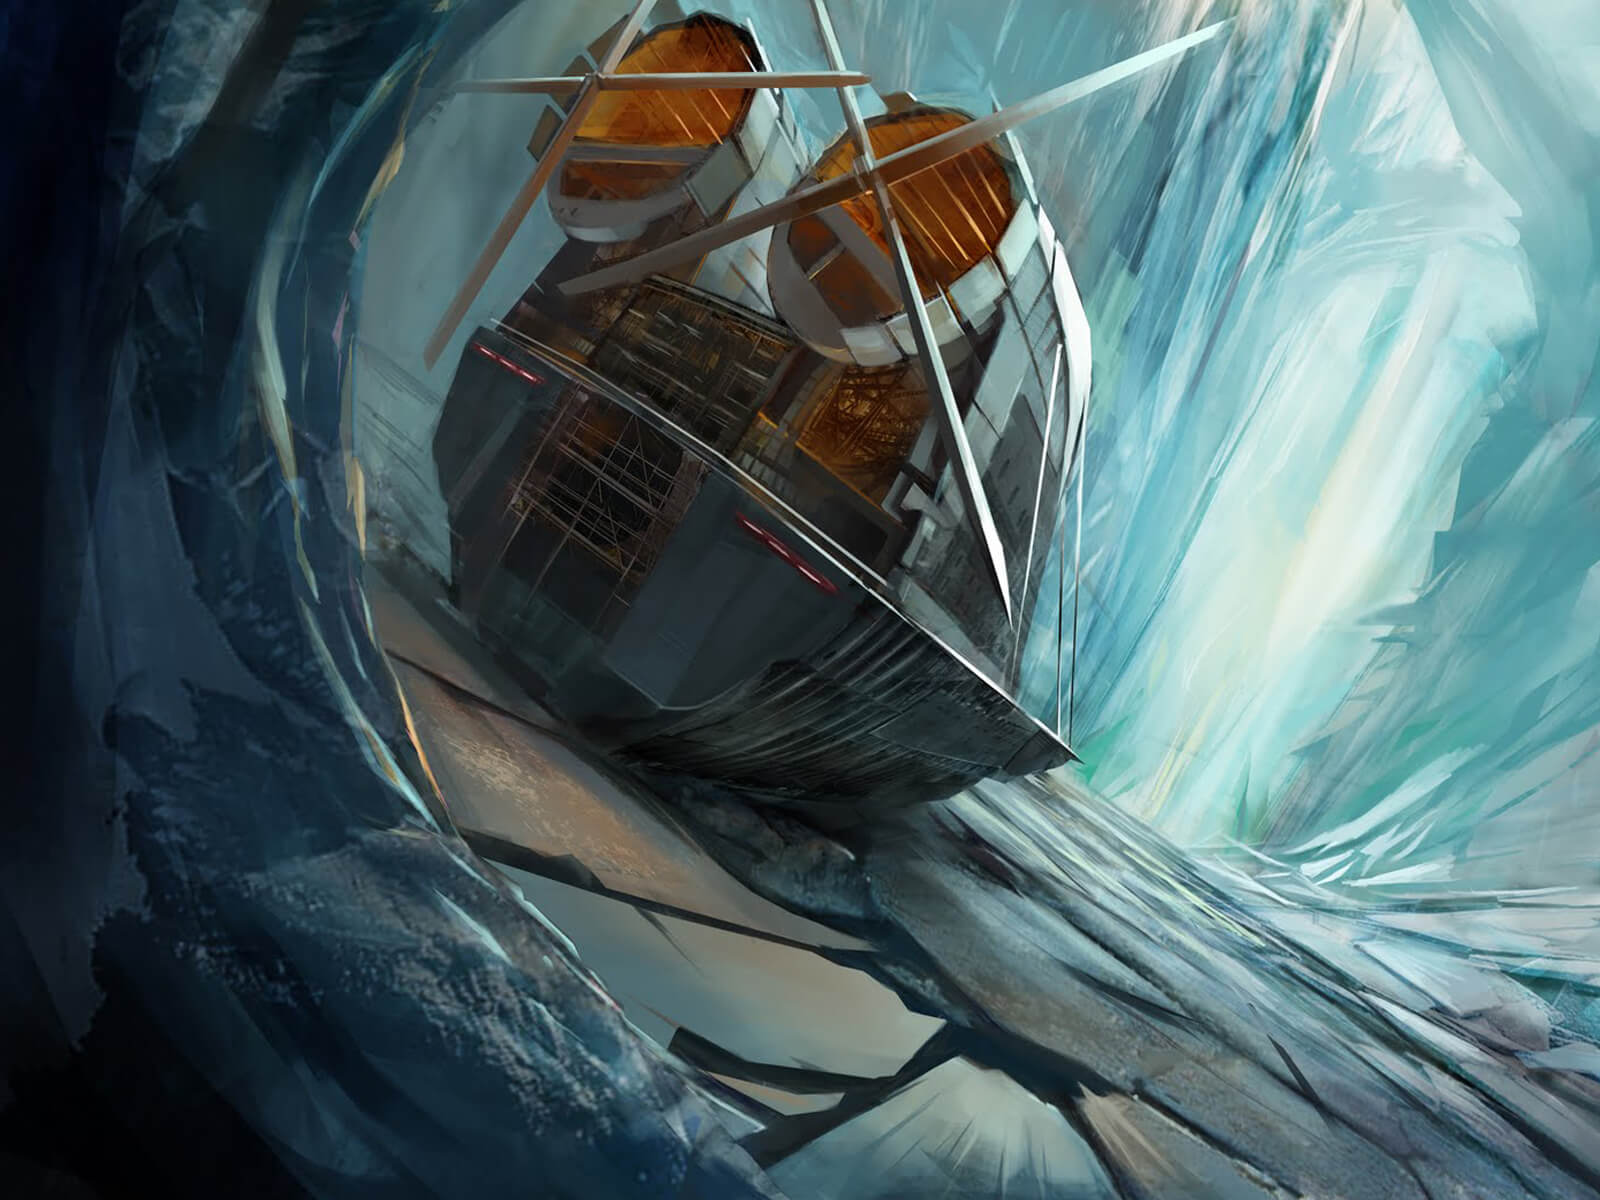 digital painting of a ship with huge propellers entering an icy cavern